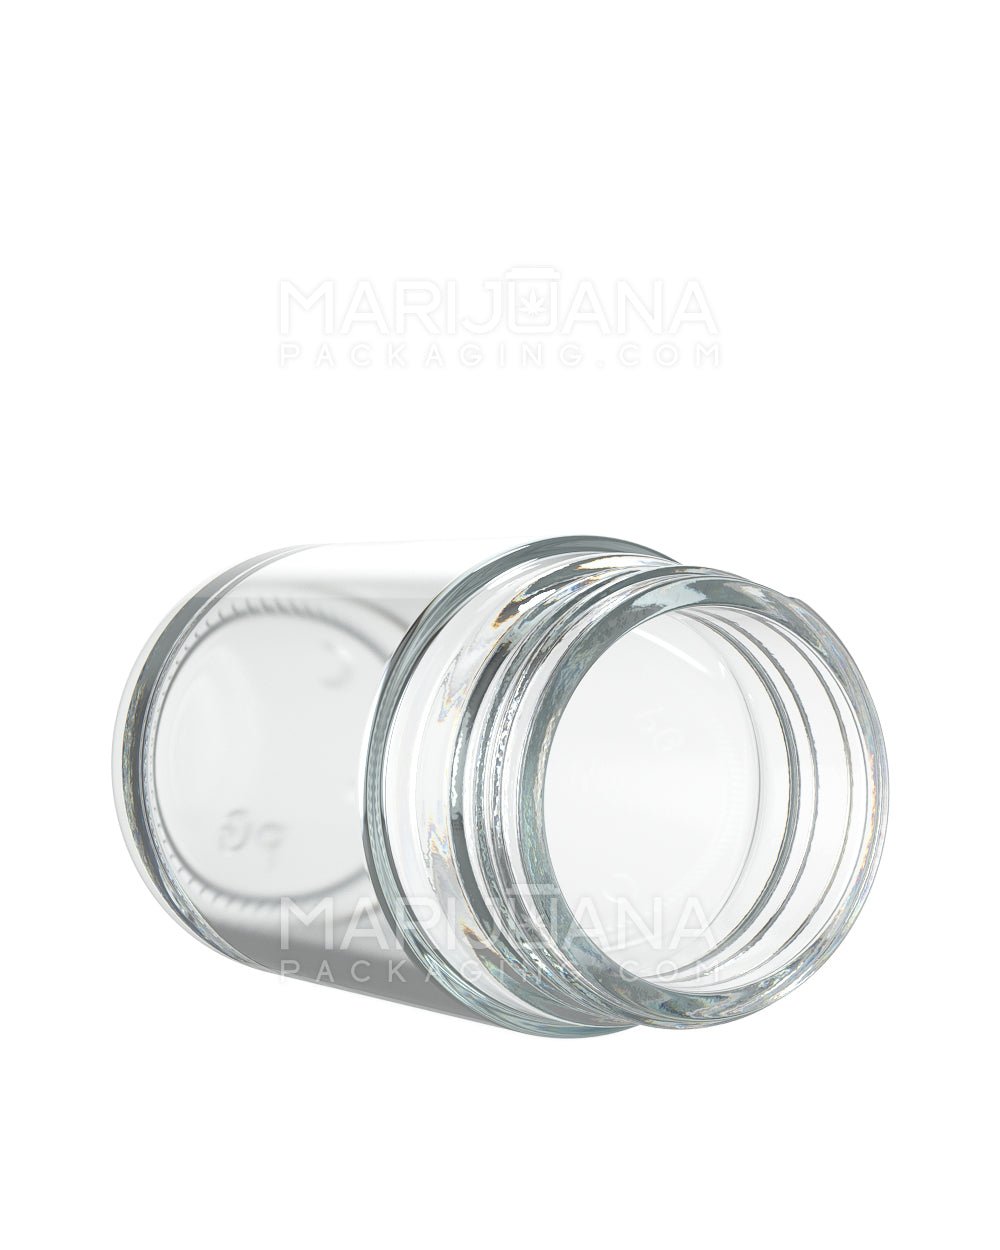 POLLEN GEAR | HiLine Straight Sided Clear Glass Jars | 45mm - 3.75oz - 72 Count - 3